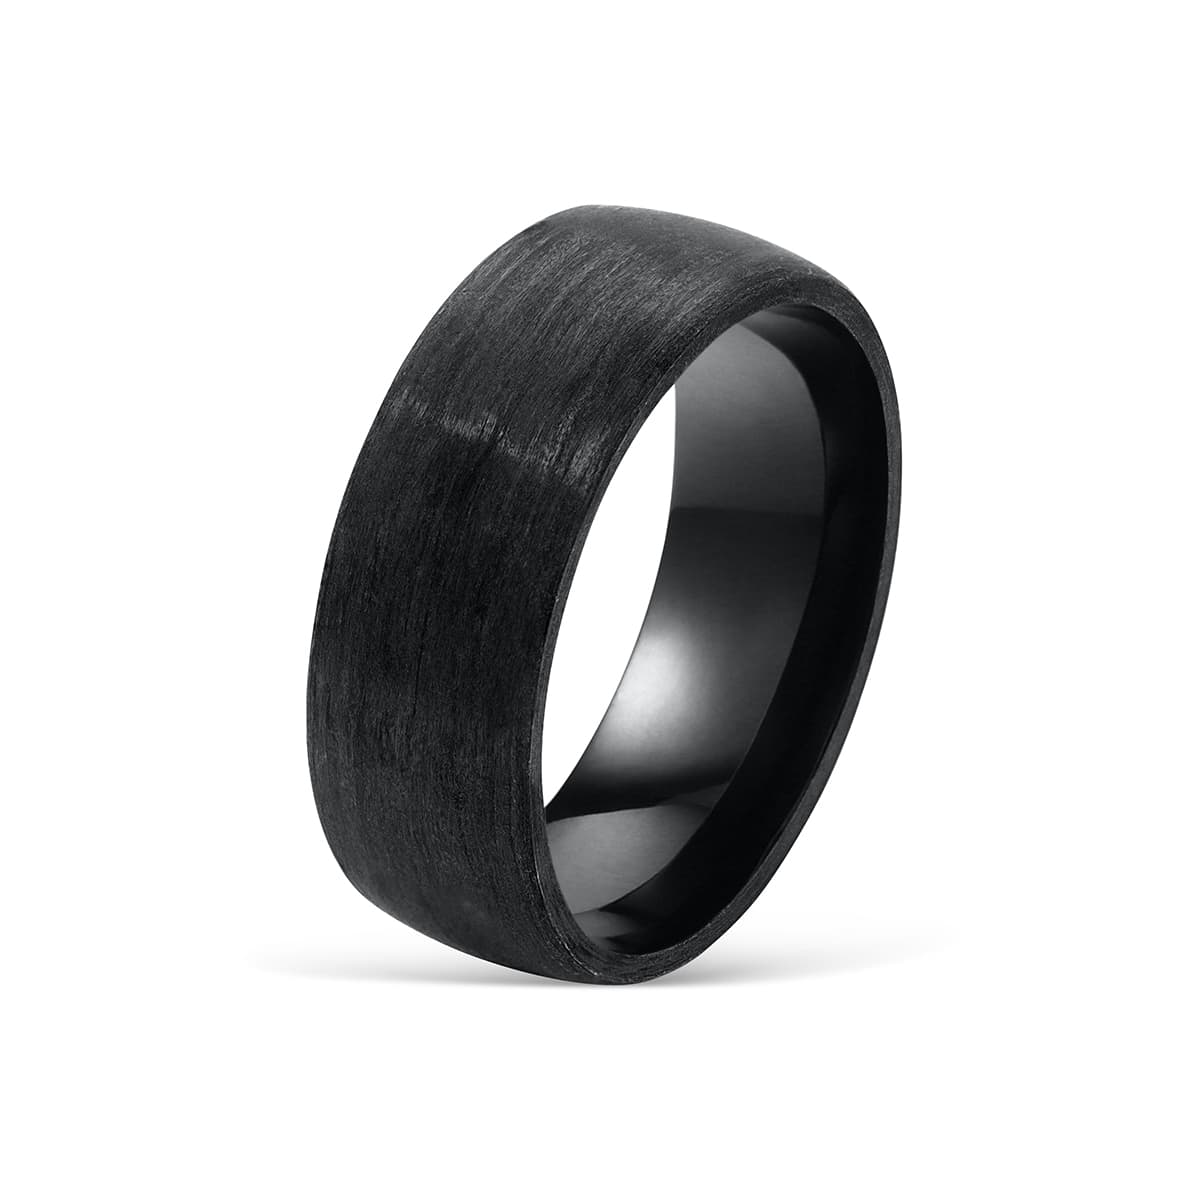 Men's Wedding Titan Band in Silver | Size 9.5 | Titanium Ring | Modern Gents Trading Co